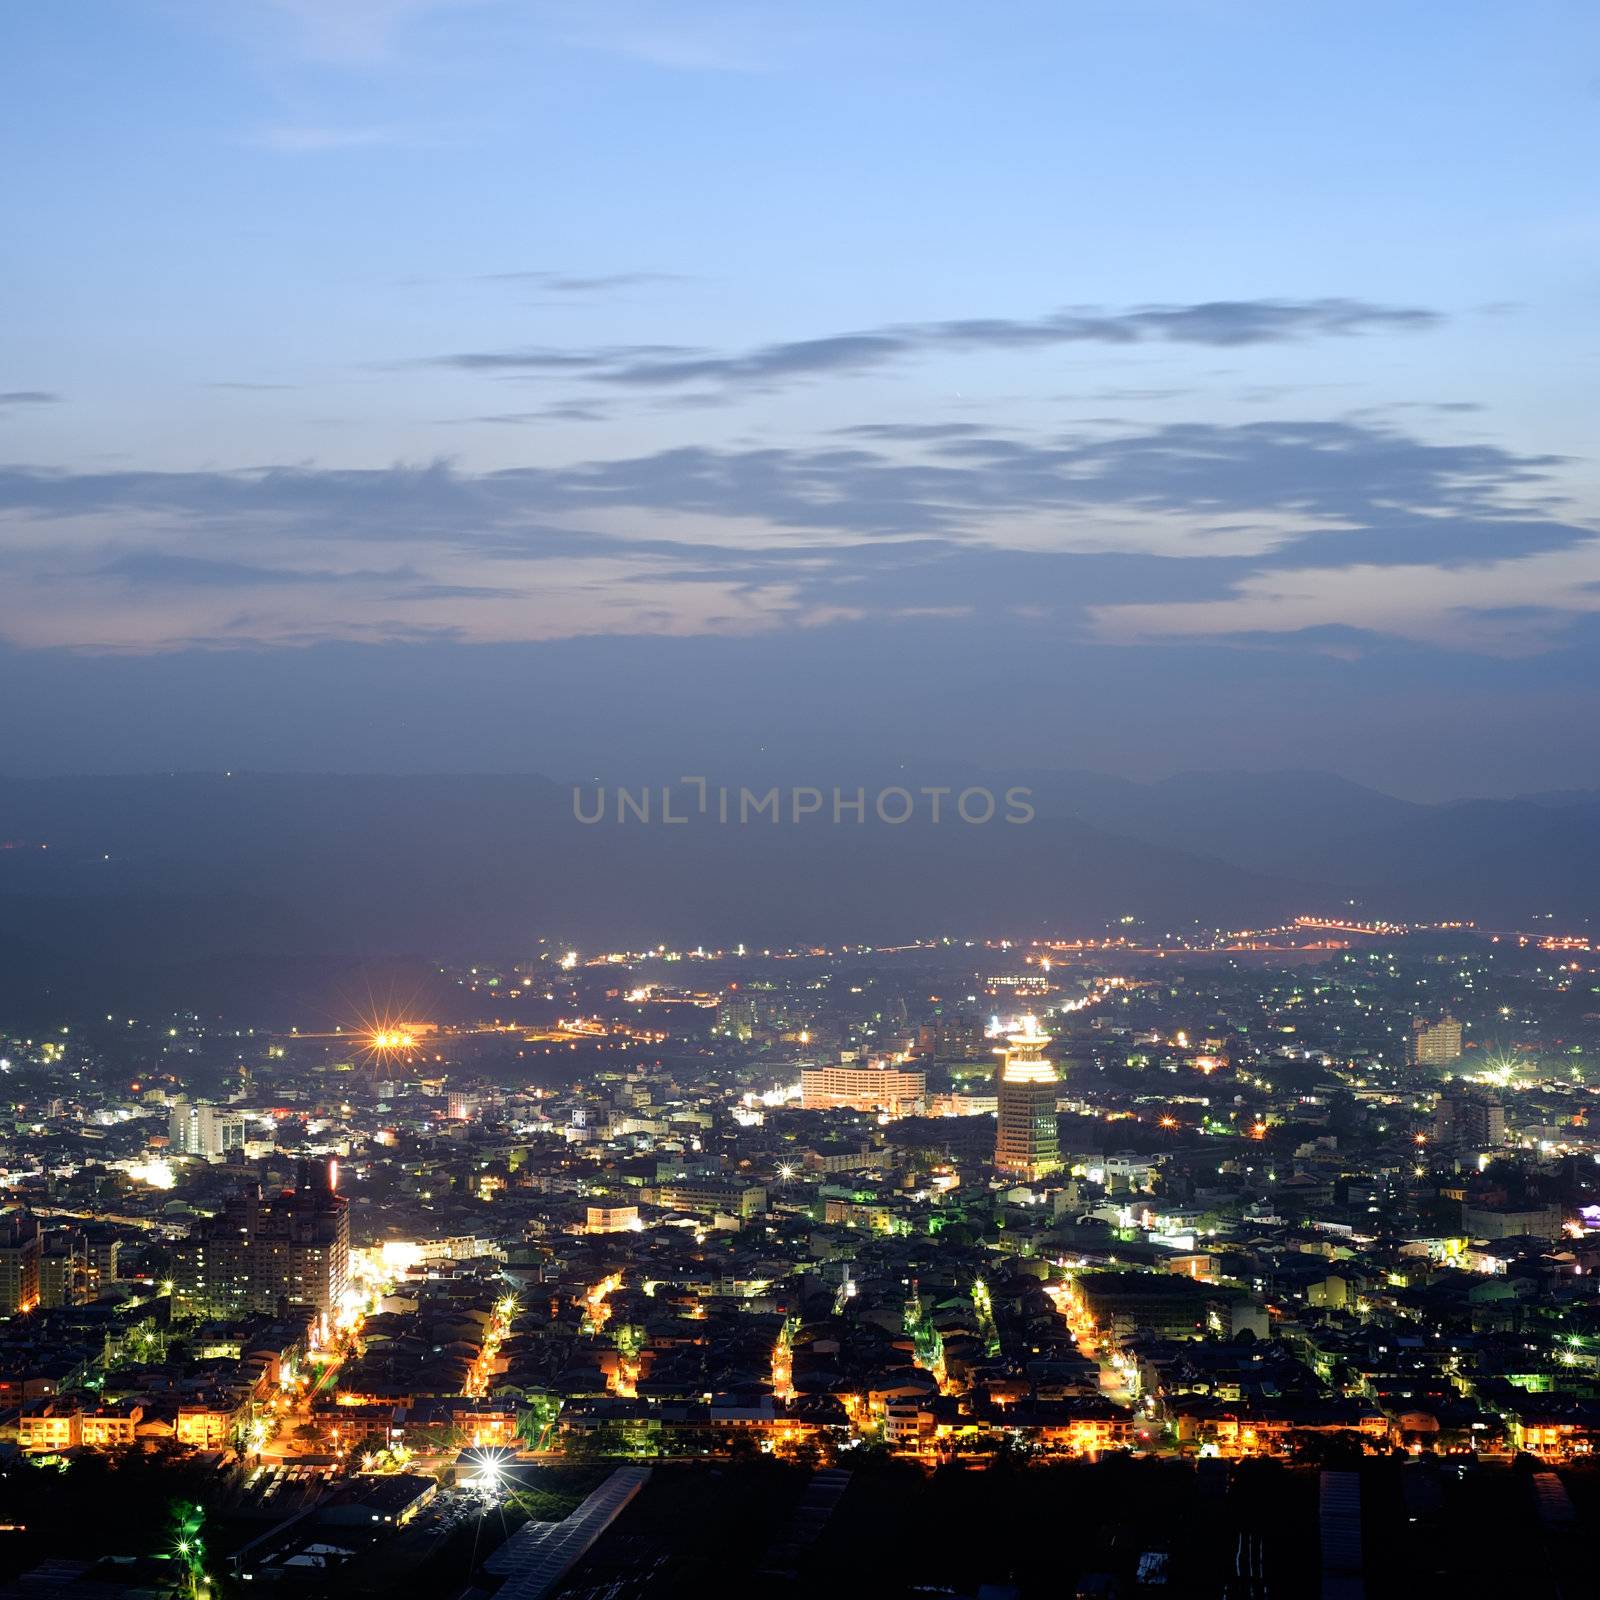 Cityscape of night scenery with houses and buildings under blue sky in Puli township, Nantou County, Taiwan, Asia.